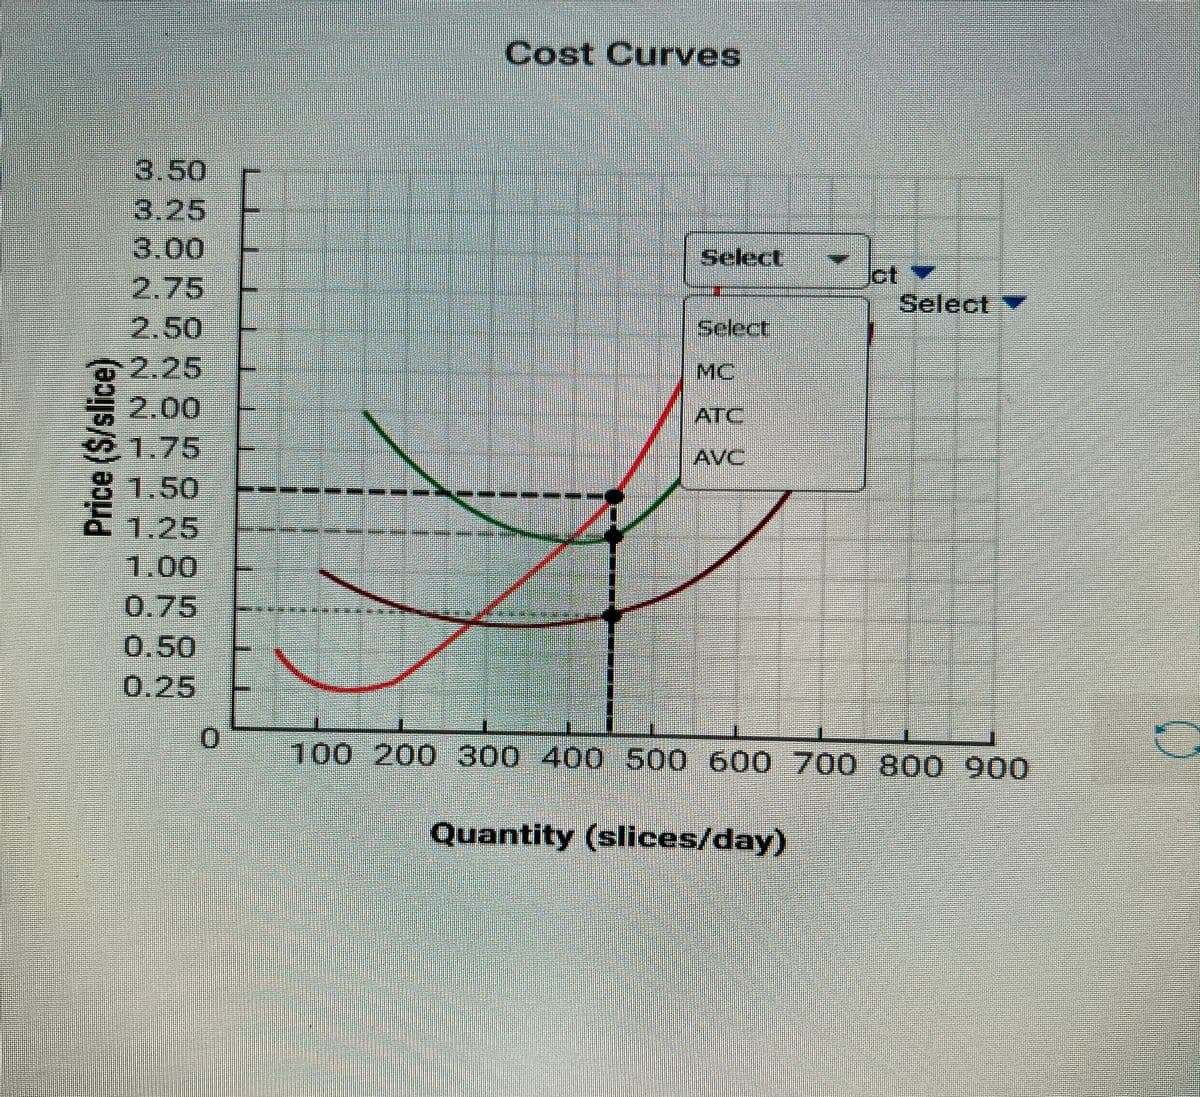 Cost Curves
3.50
3.25
3.00
2.75
2.50
2.25
2.00
1.75
81.50
P1.25
Select
ct
Select
Select,
MC
ATC
AVC
1.00
0.75
0.50
0.25
100 200 300 400 500 600 700 800 900
Quantity (slices/day)
Price ($/slice)
